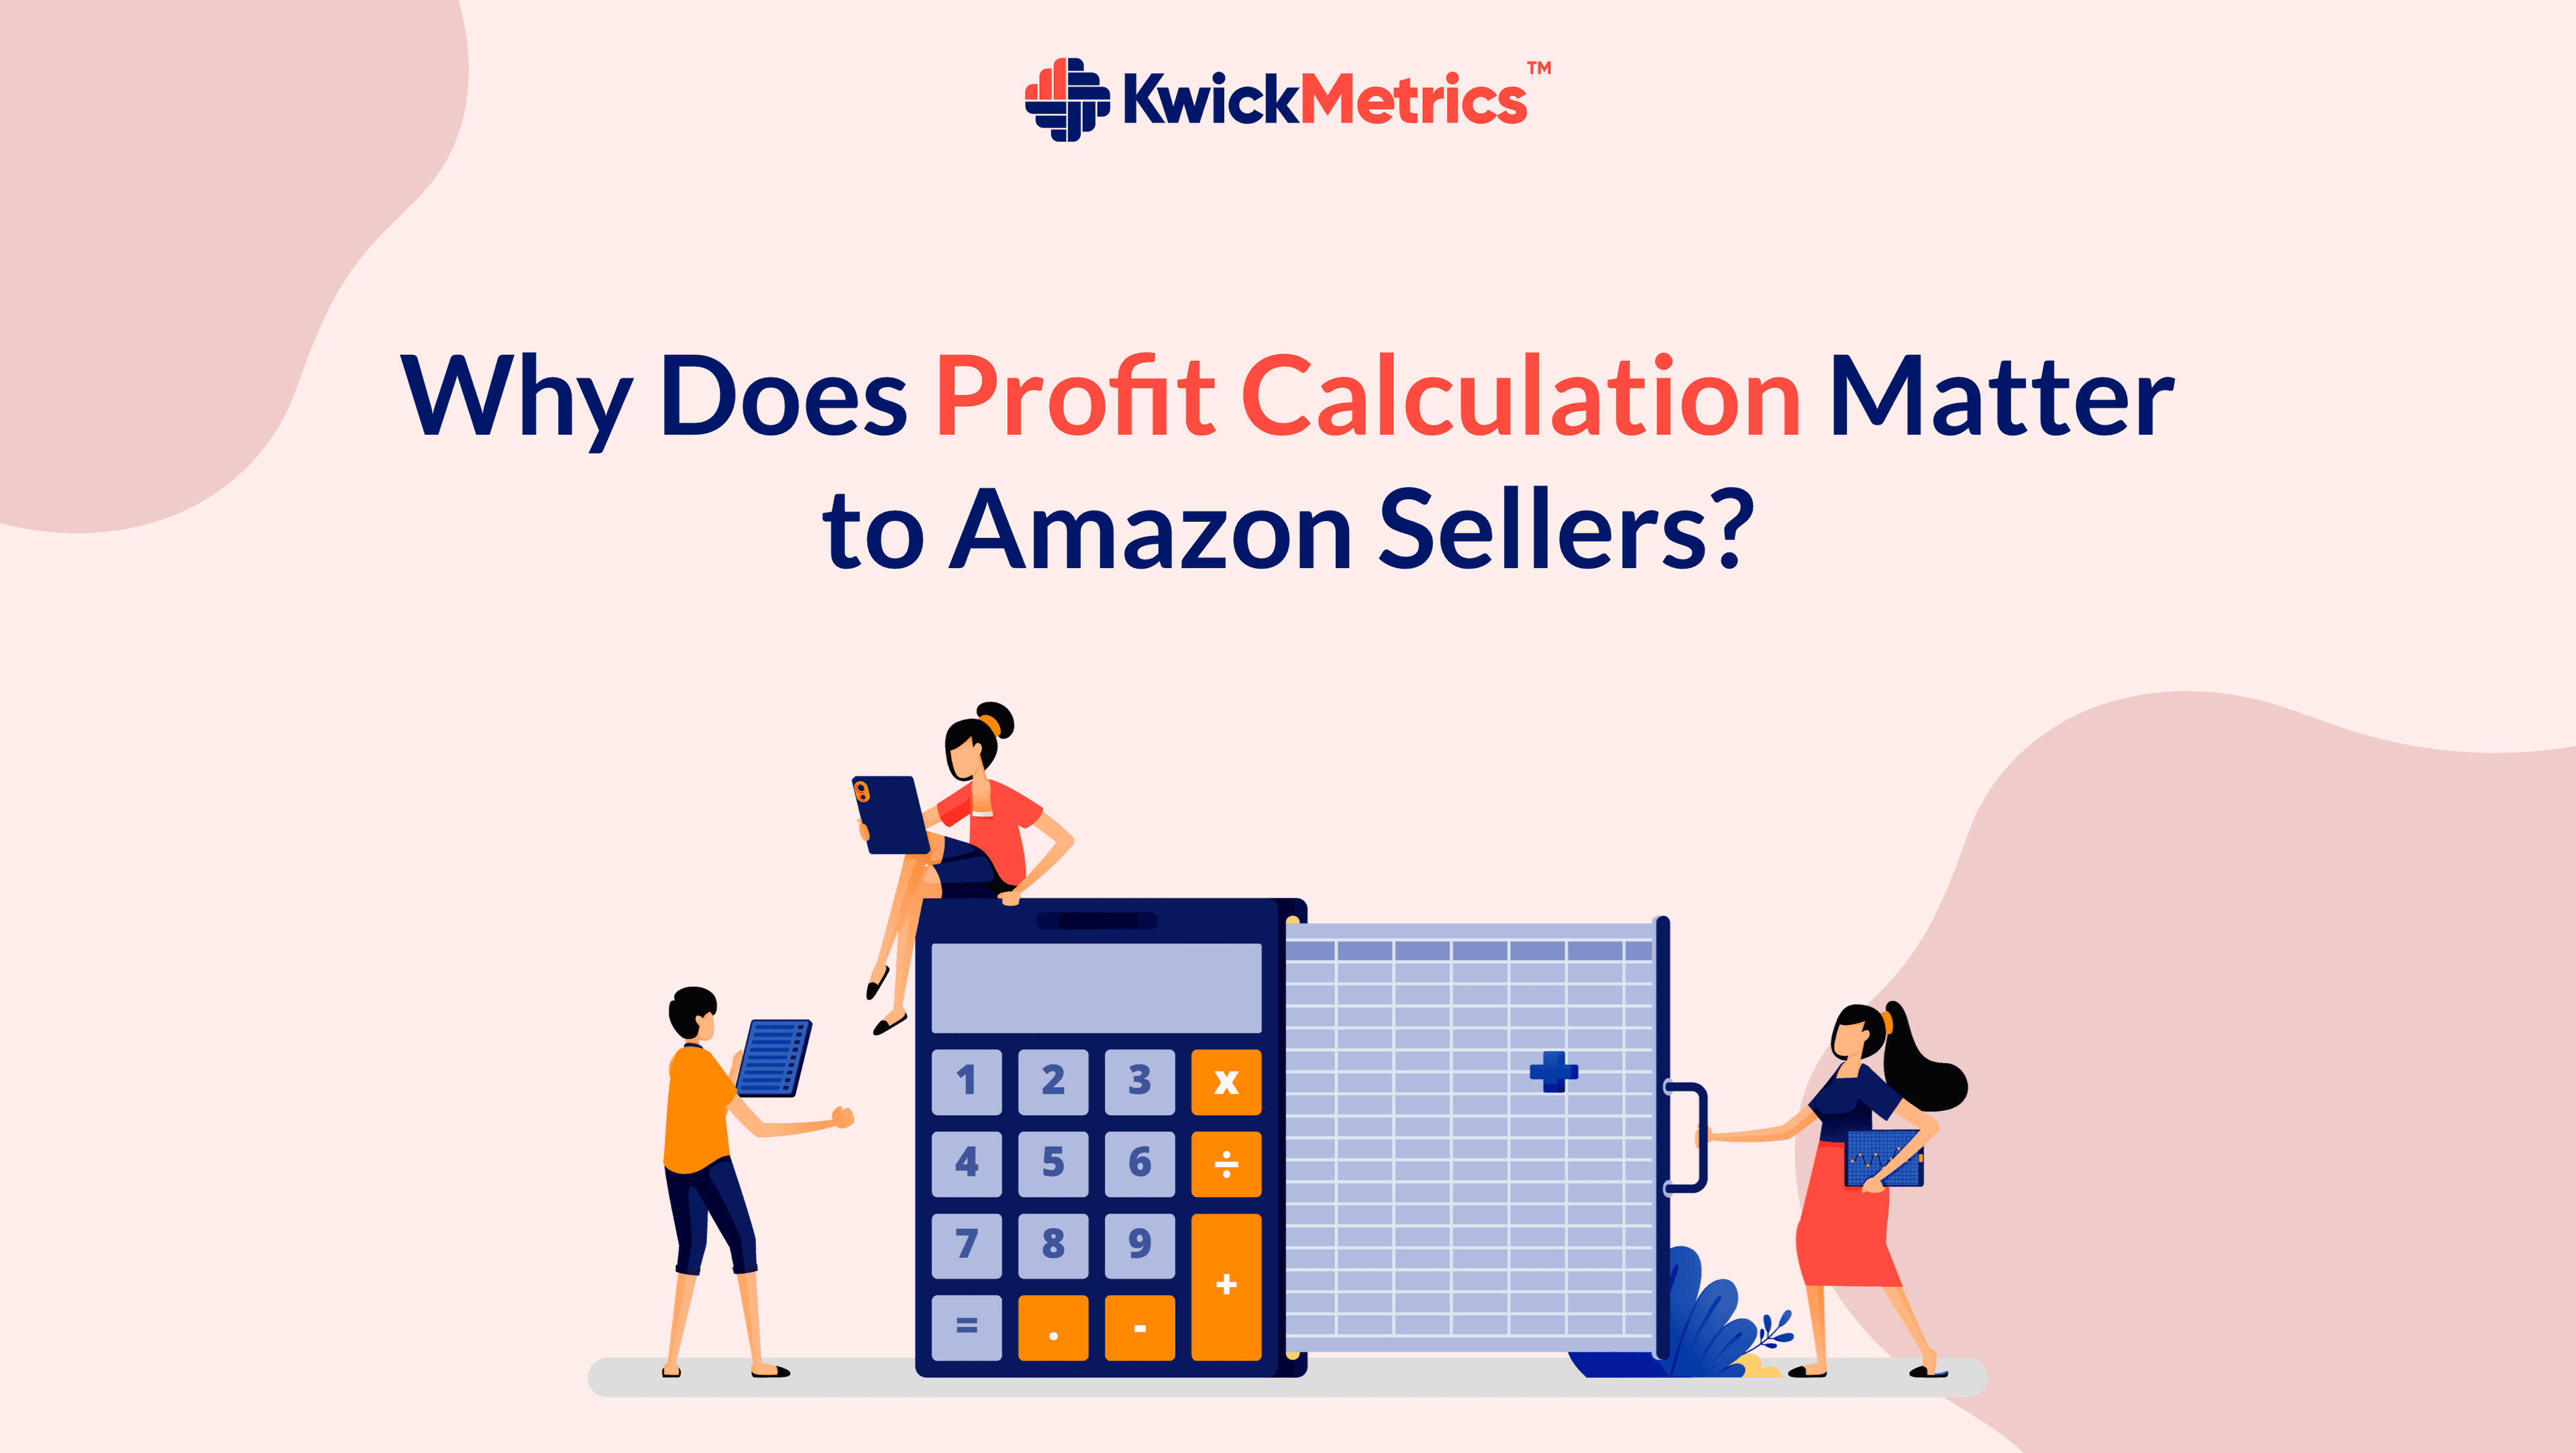 Why Does Profit Calculation Matter to Amazon Sellers?